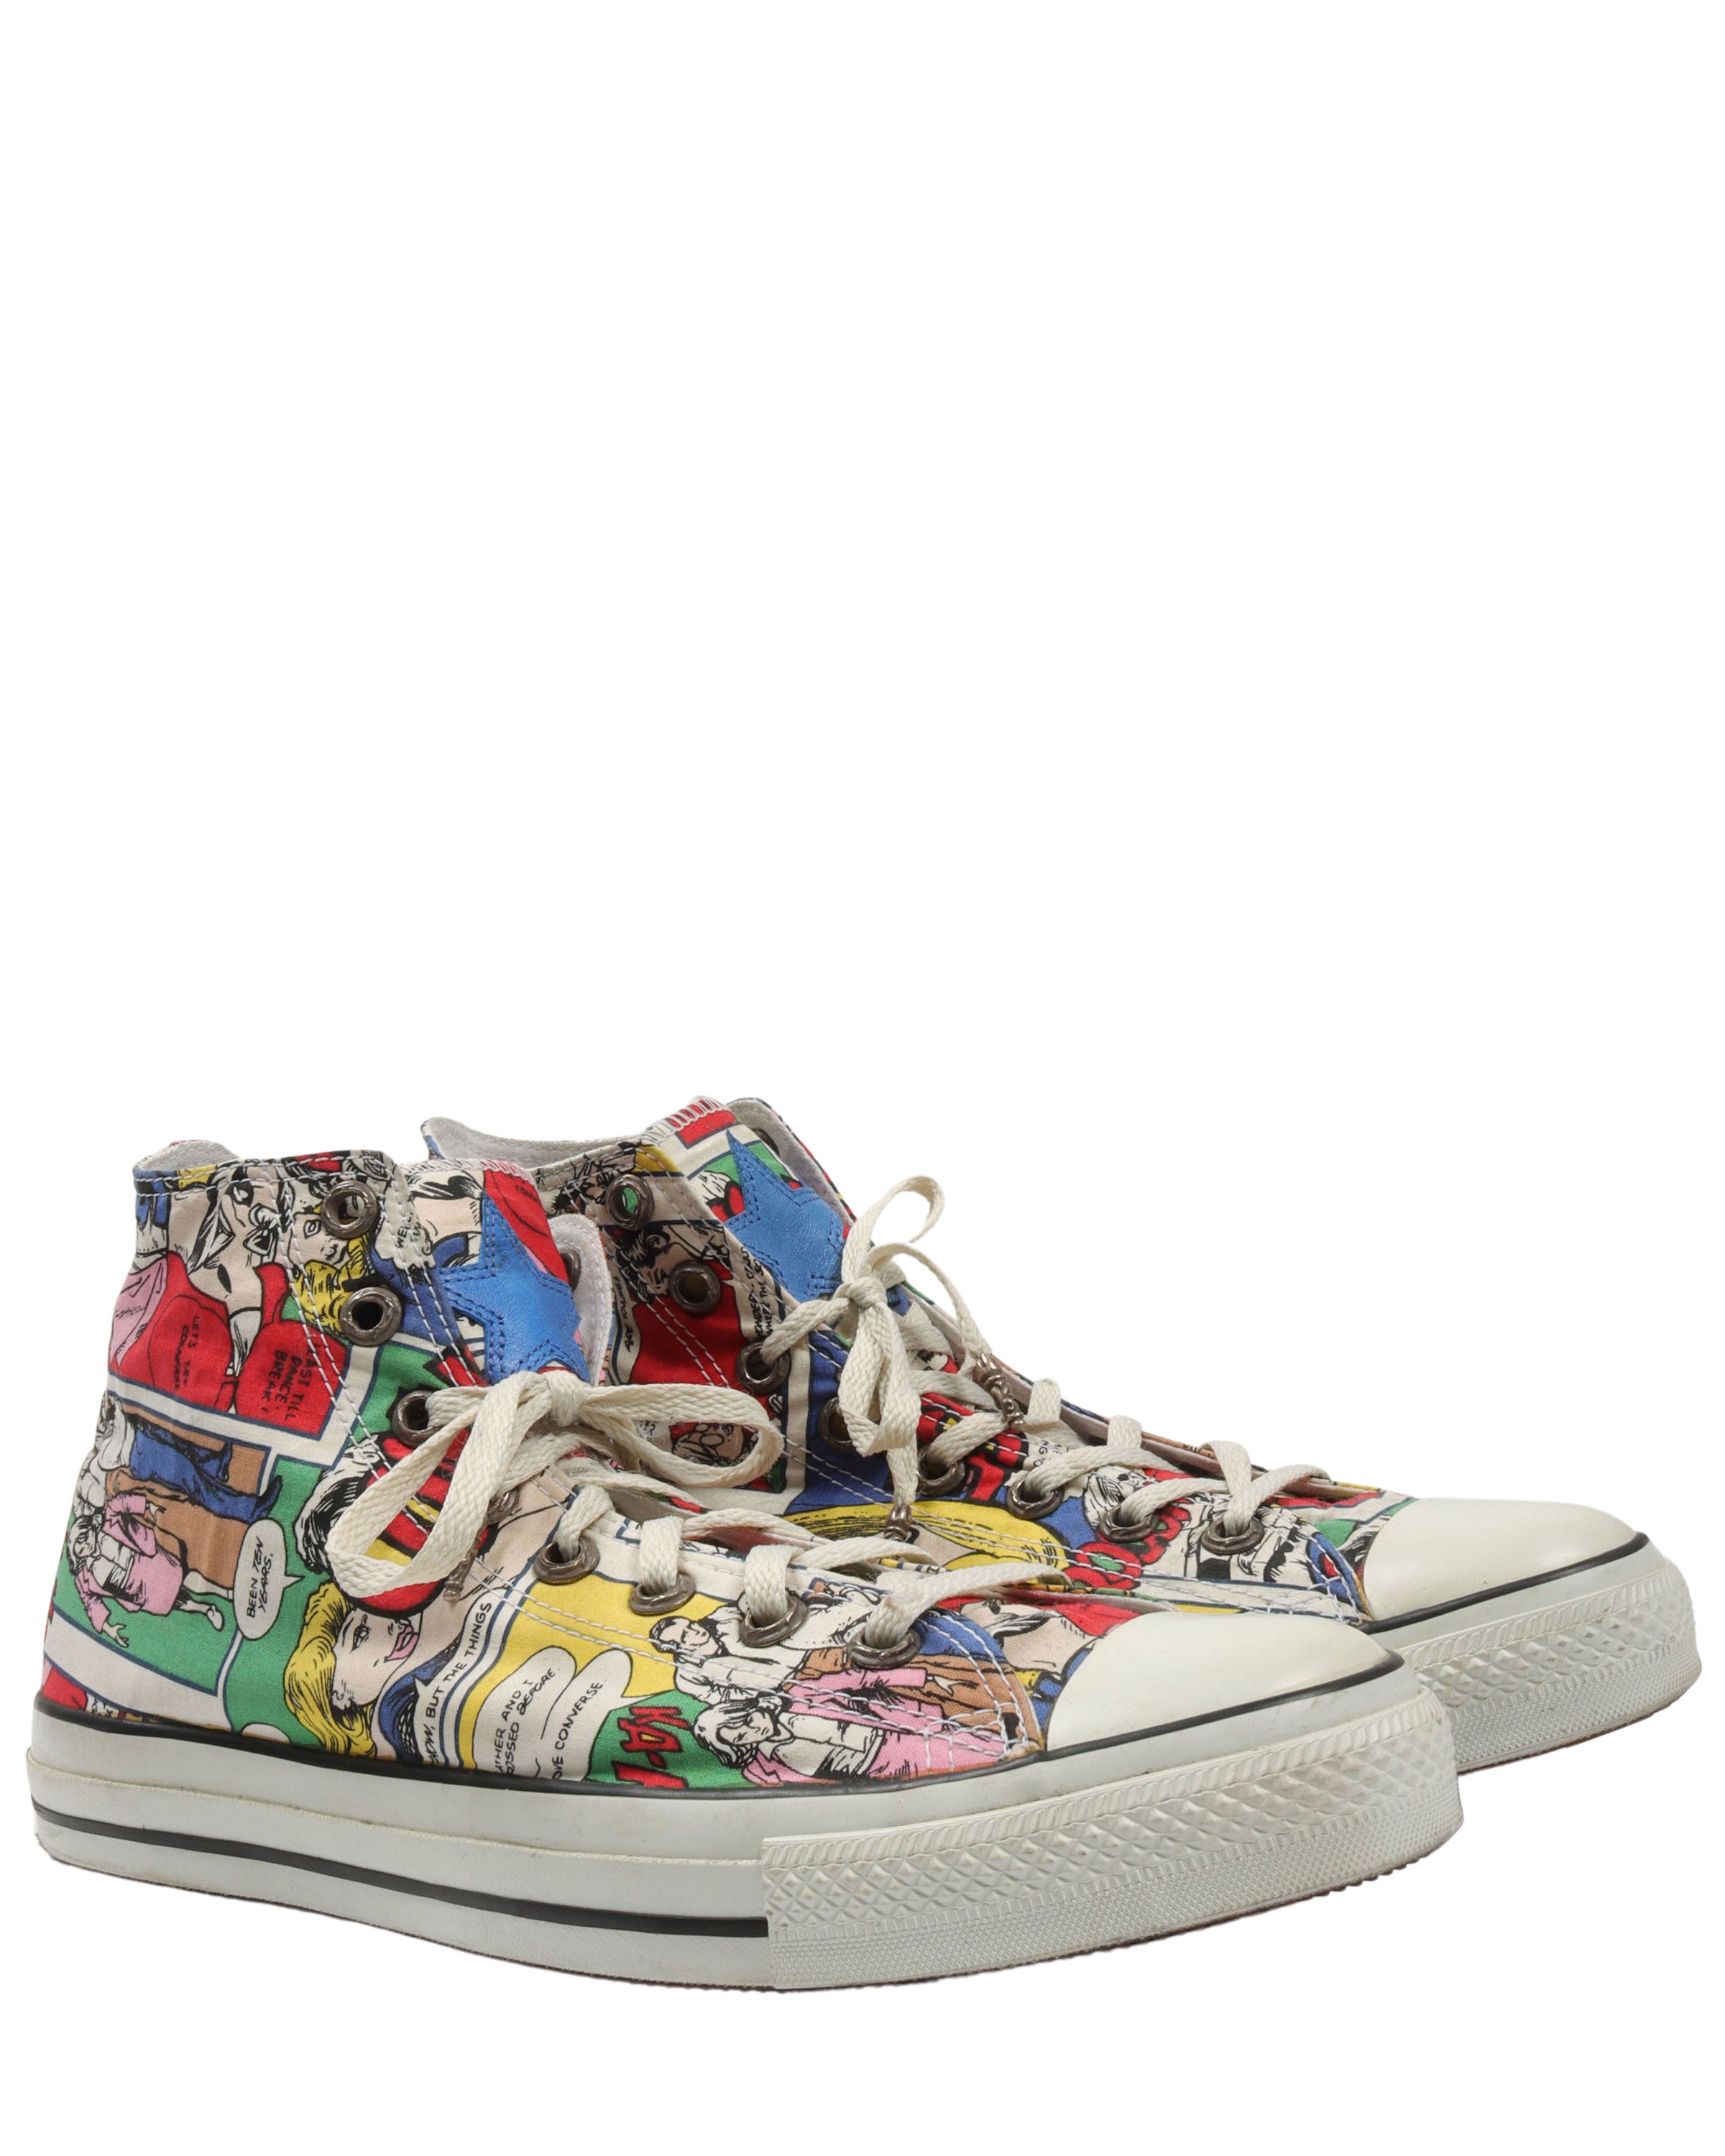 Chrome Hearts Marvel Sneakers